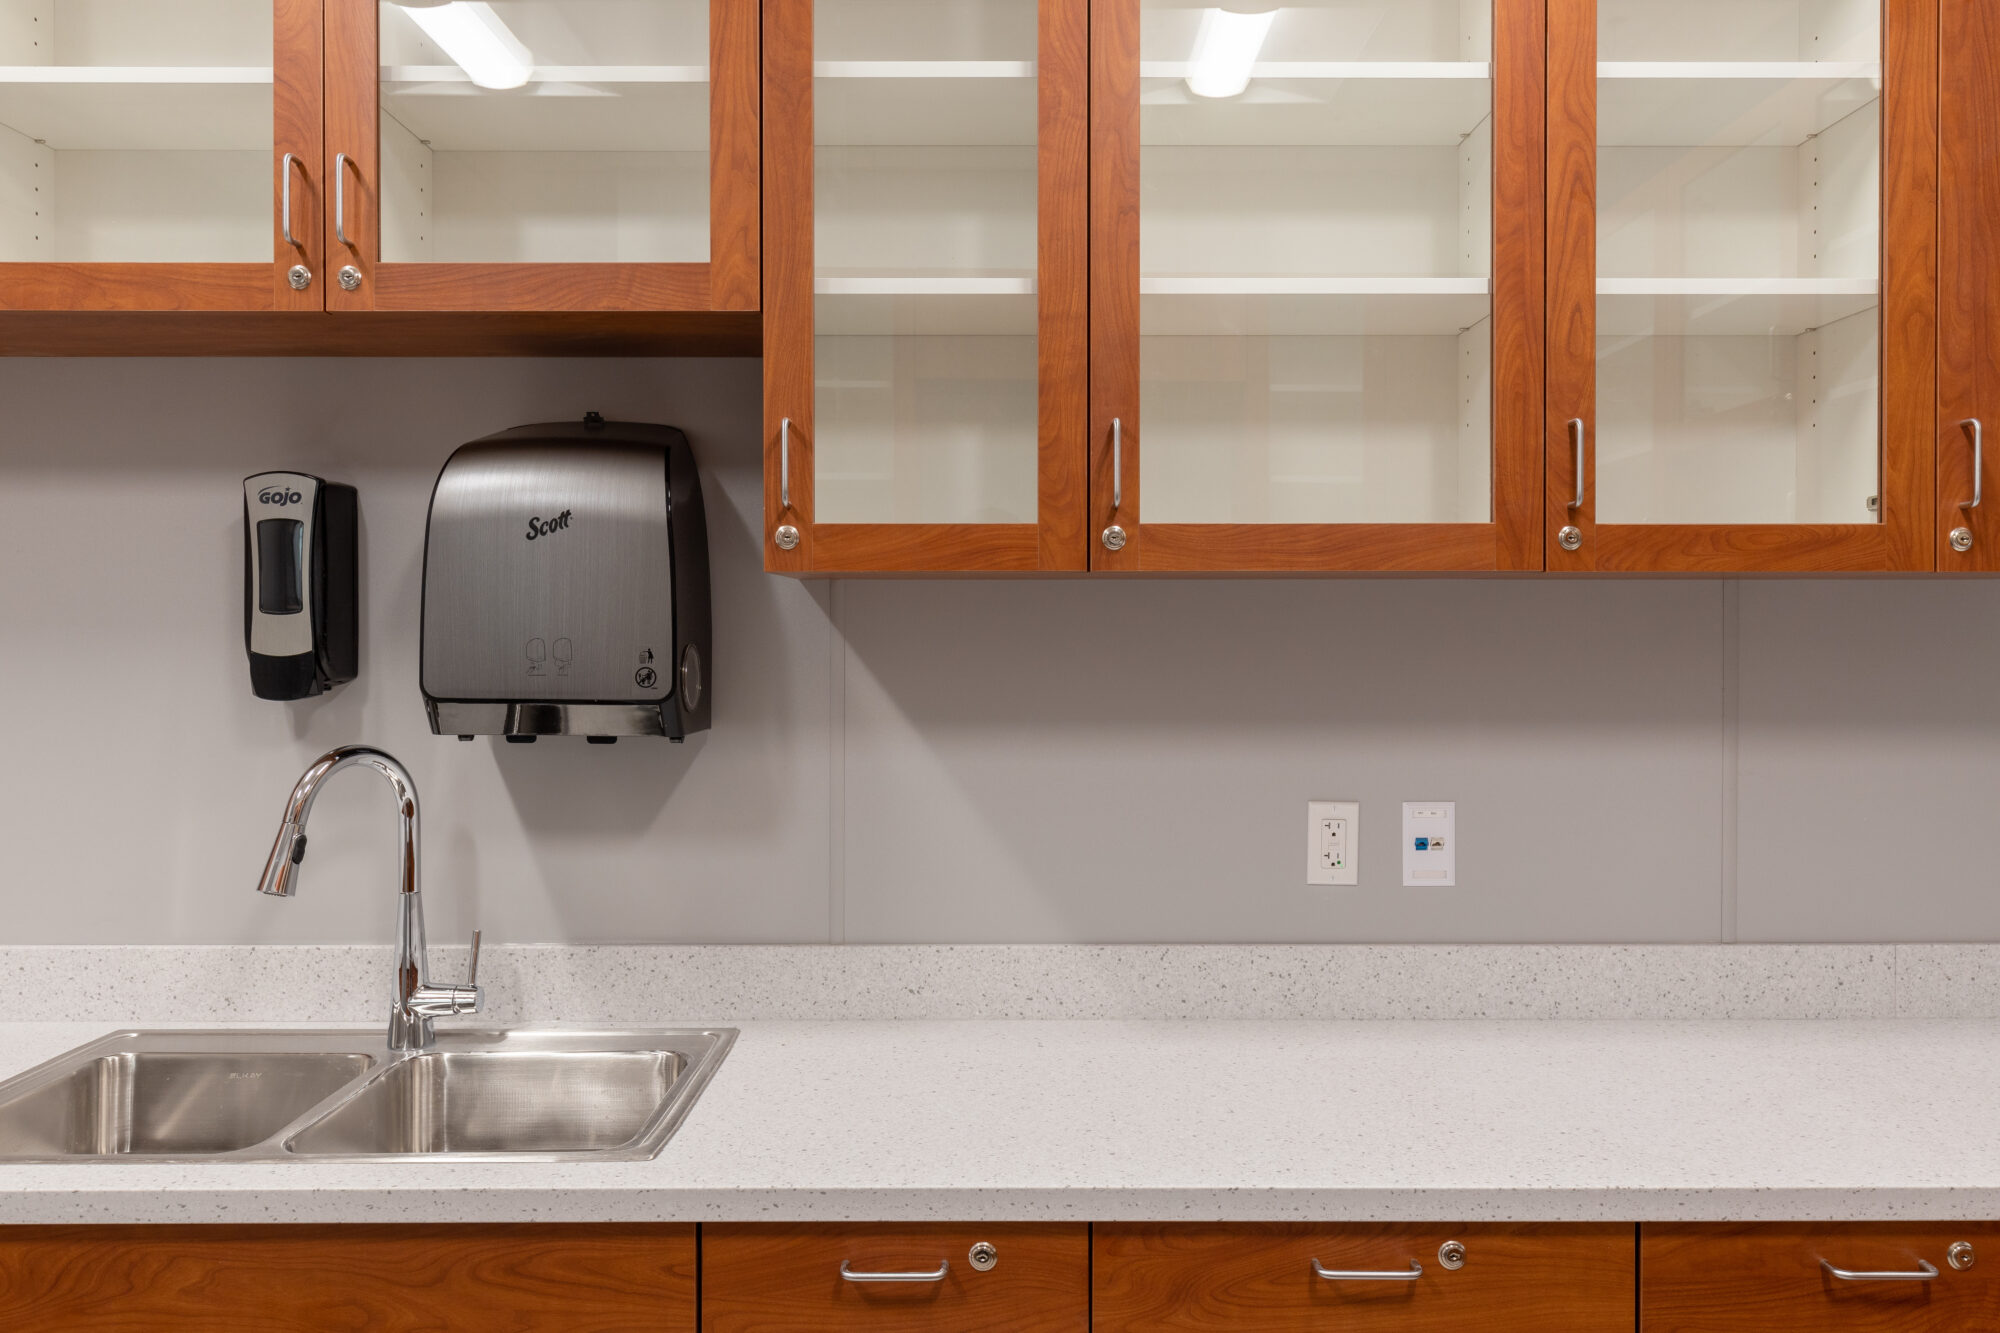 Planned Parenthood Office Renovation countertop and custom cabinetry detail